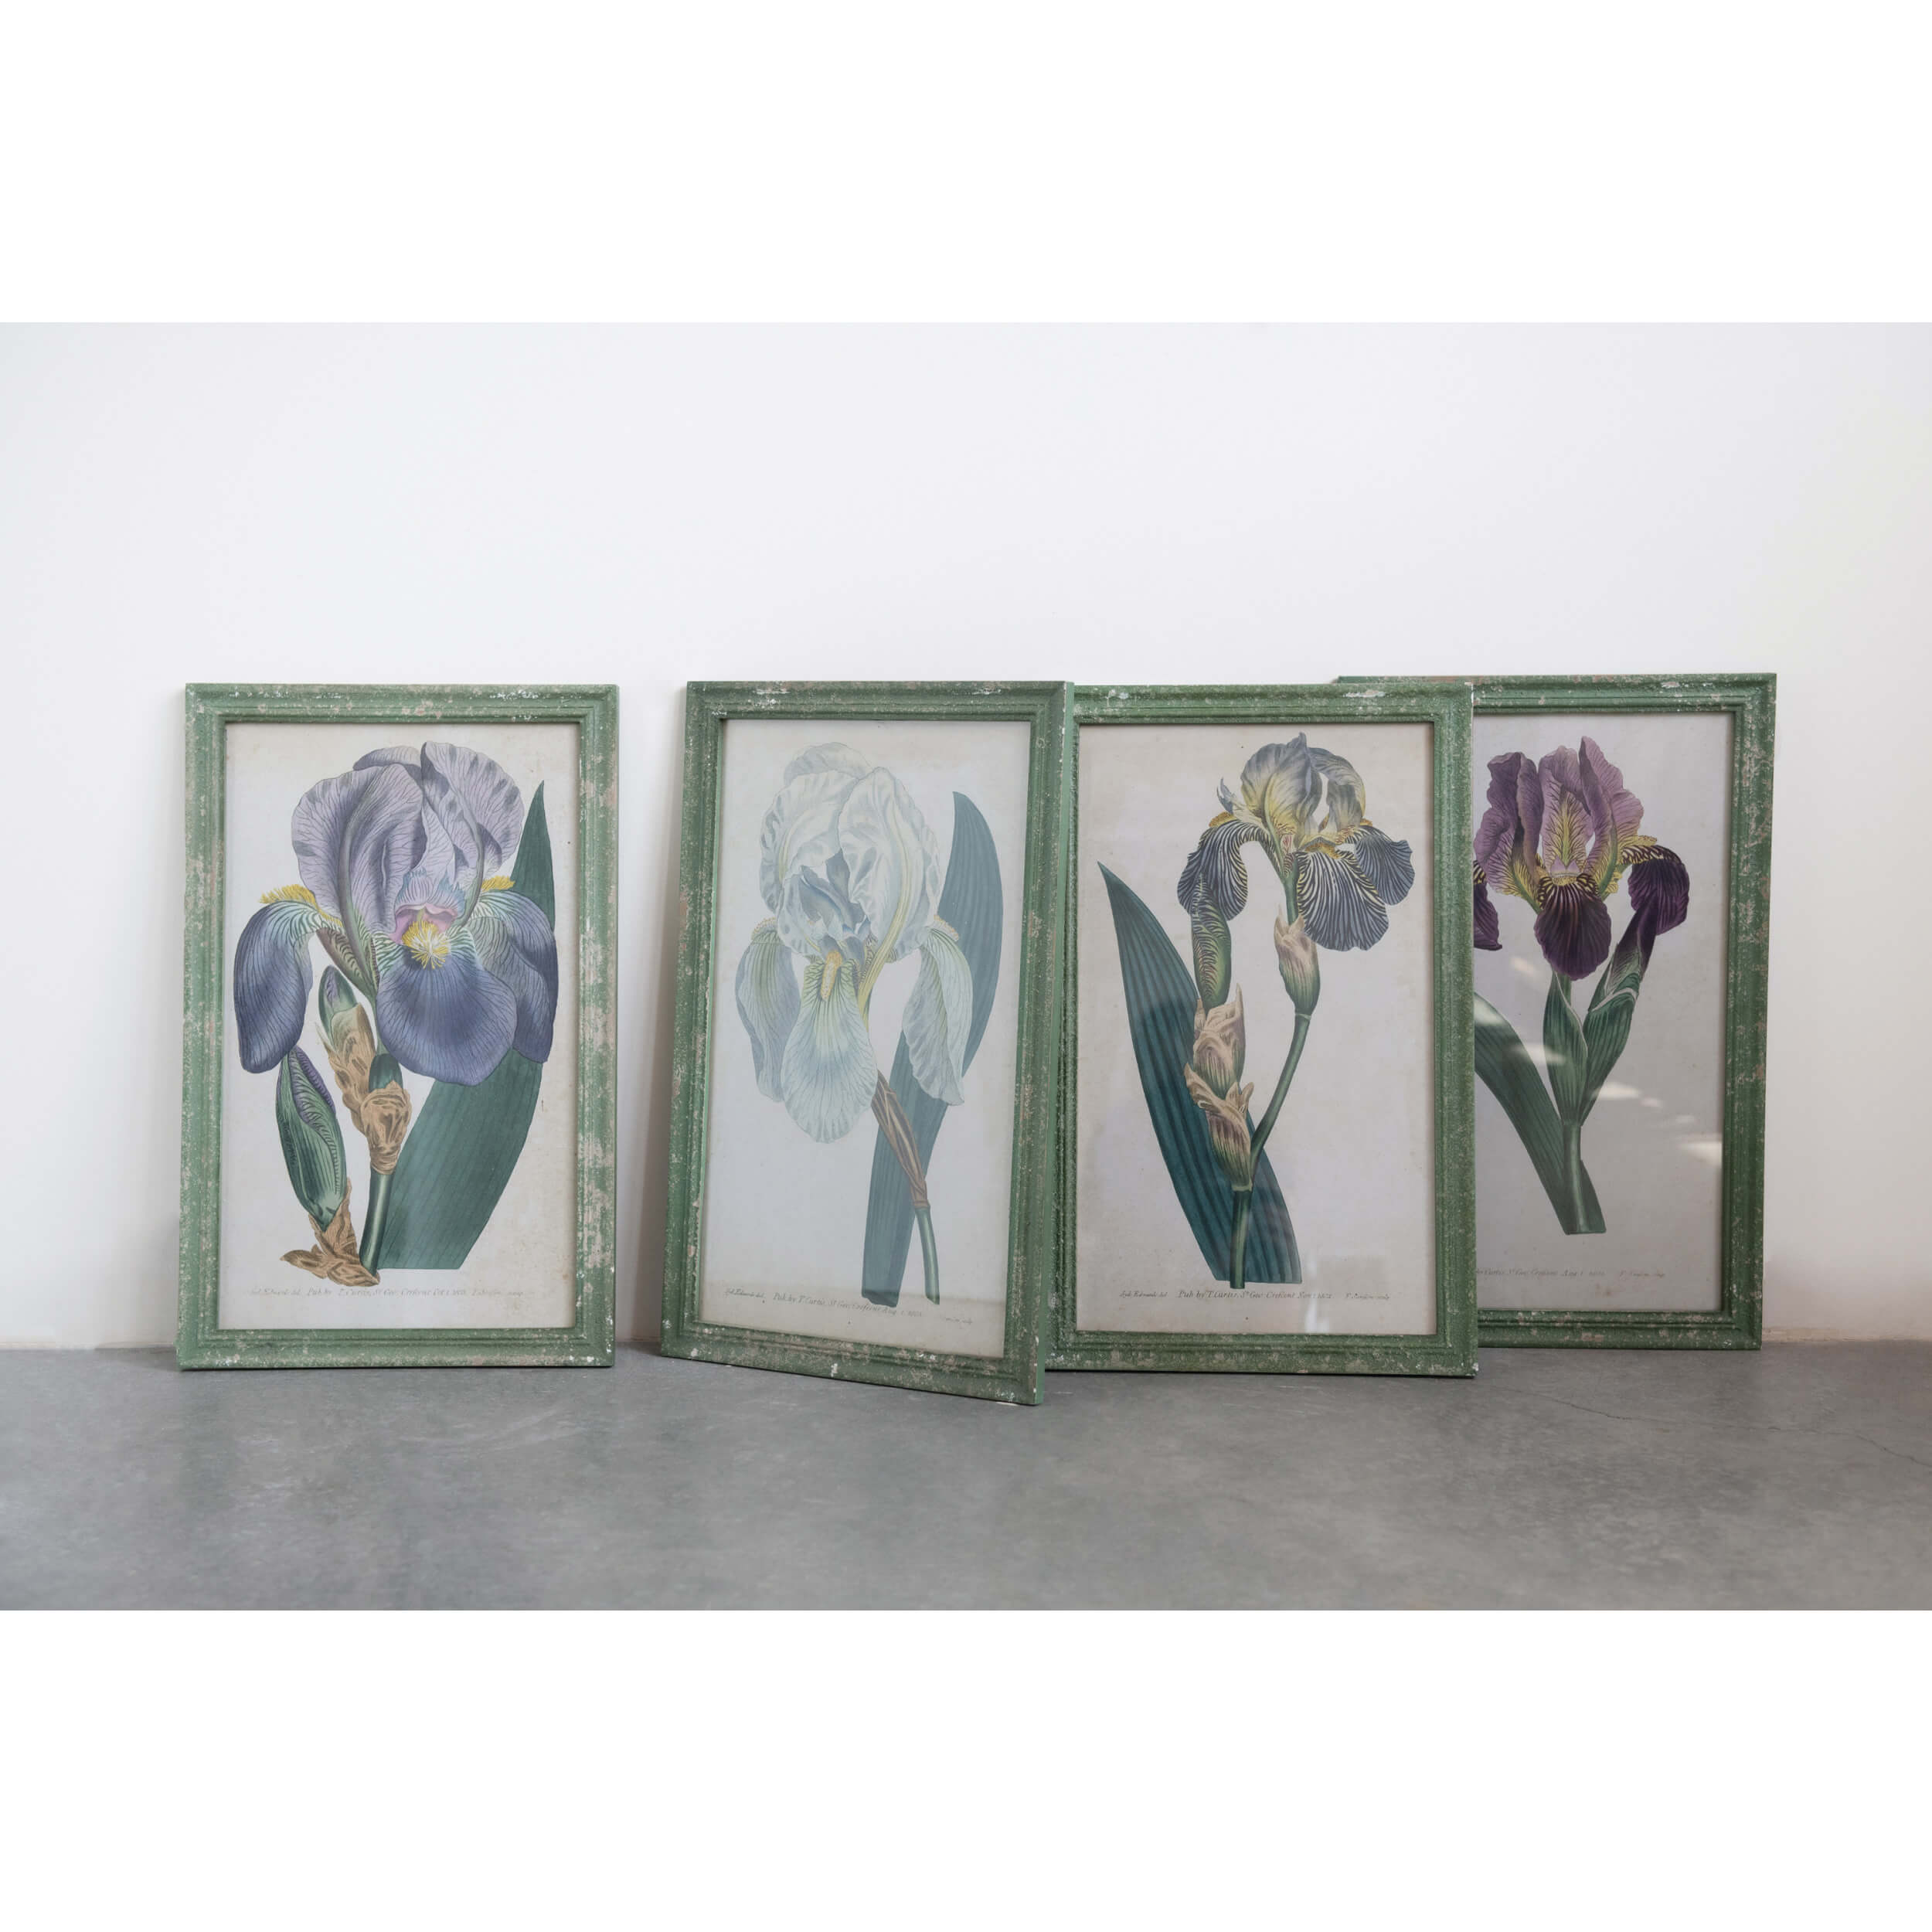 Styled Vintage Inspired Framed Iris Prints leaning against a wall. 